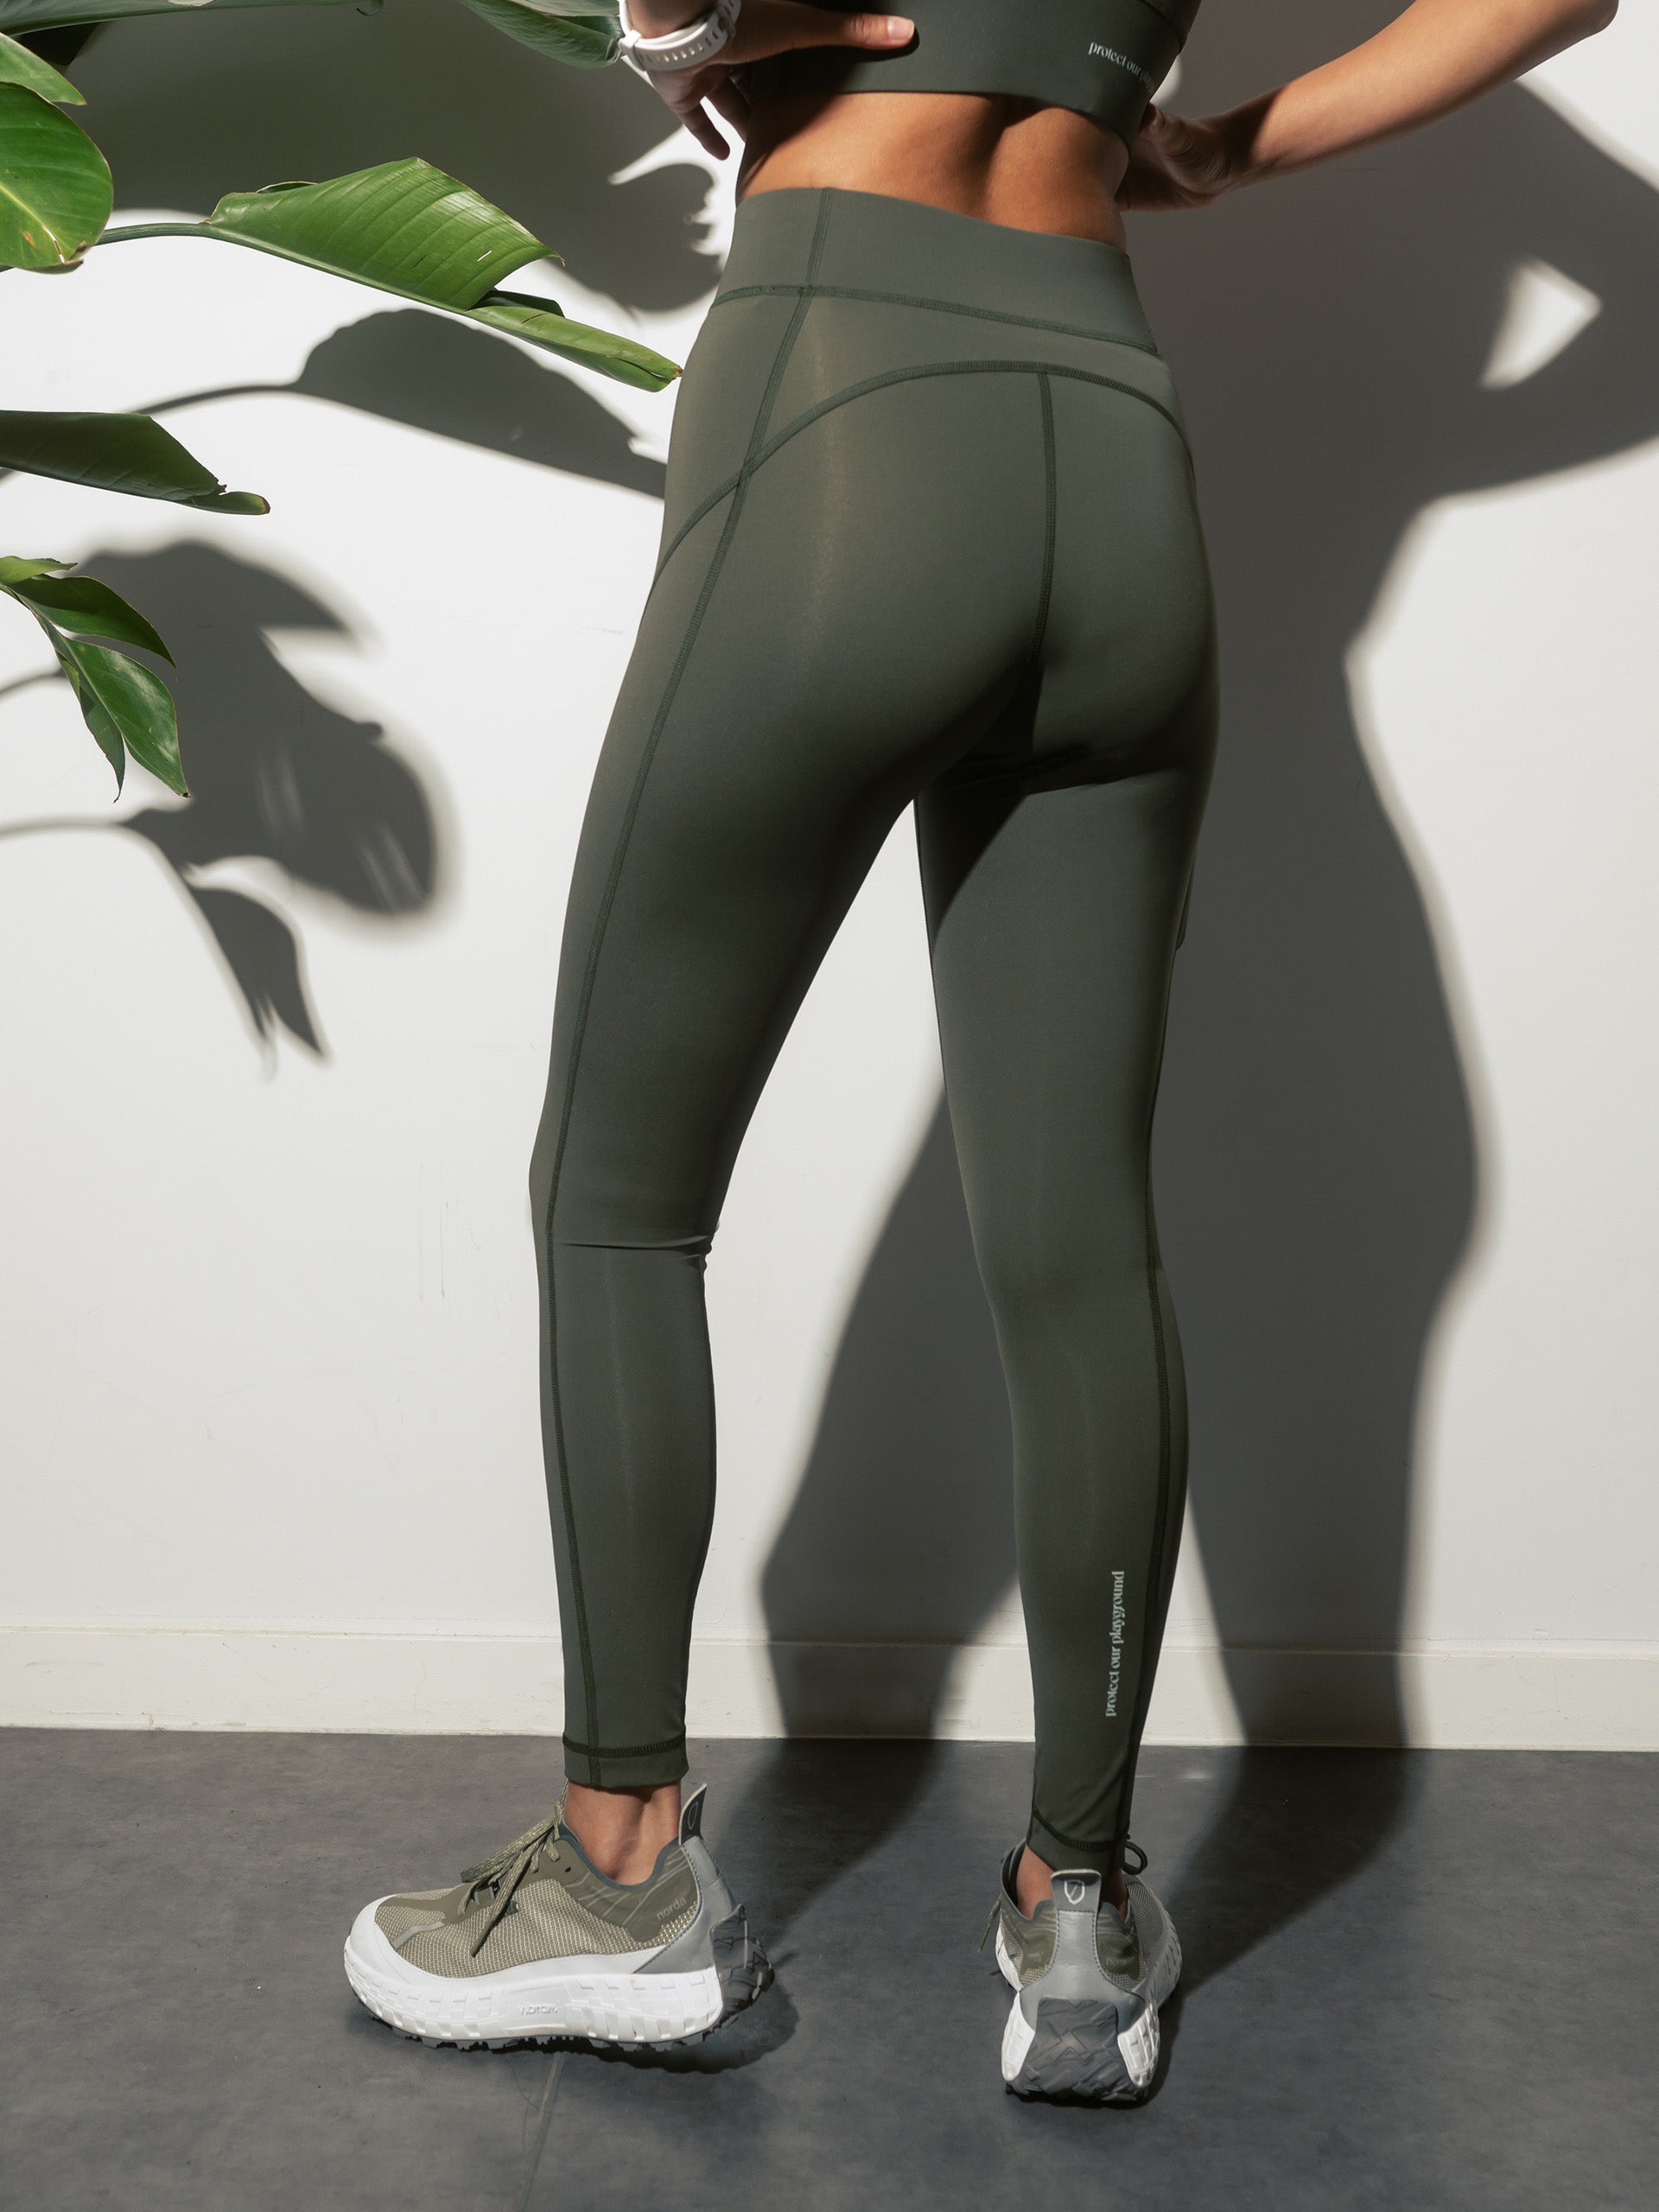 Women's training leggings with recycled materials